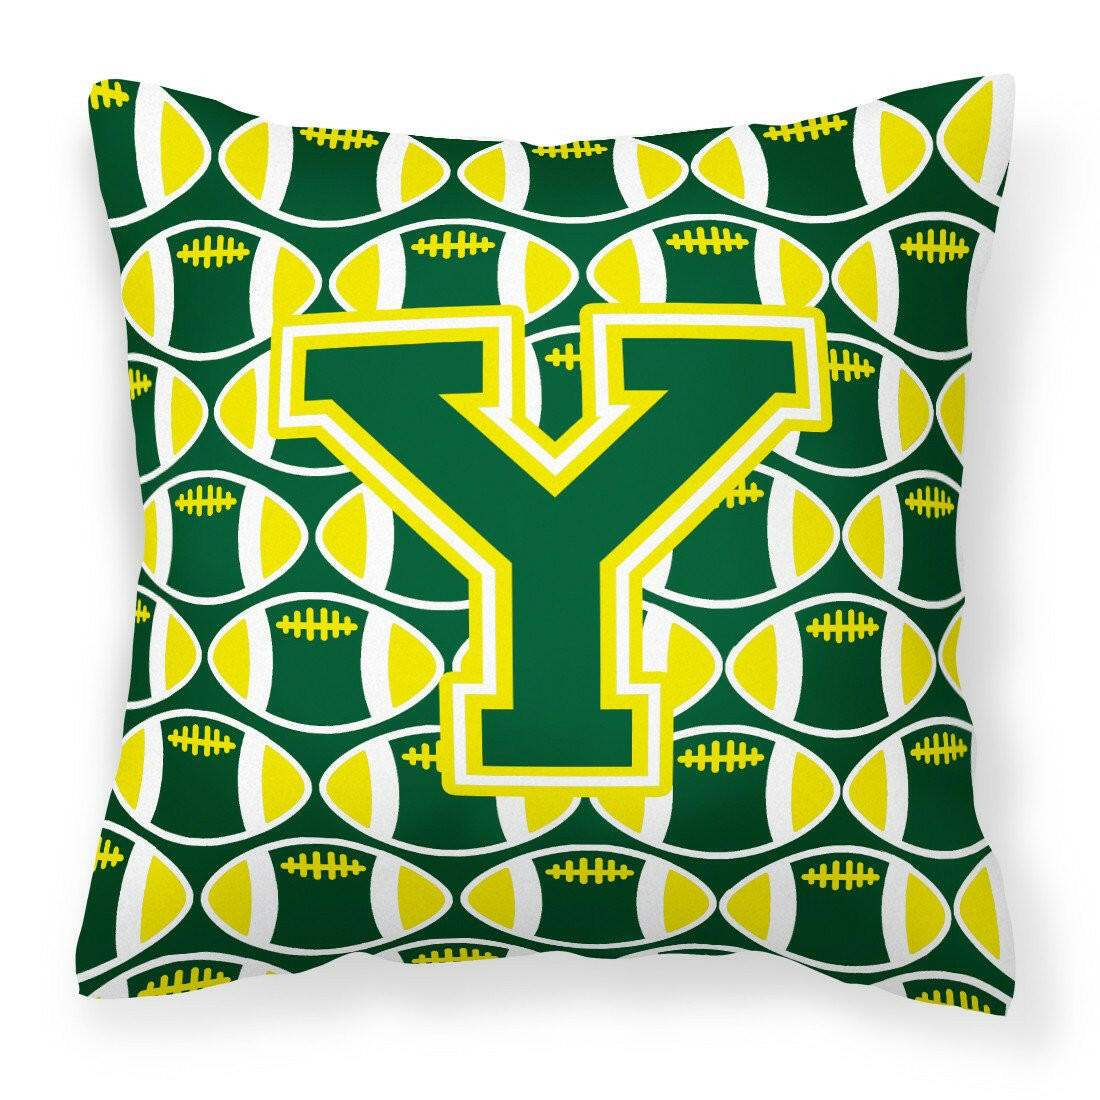 Letter Y Football Green and Yellow Fabric Decorative Pillow CJ1075-YPW1414 by Caroline's Treasures